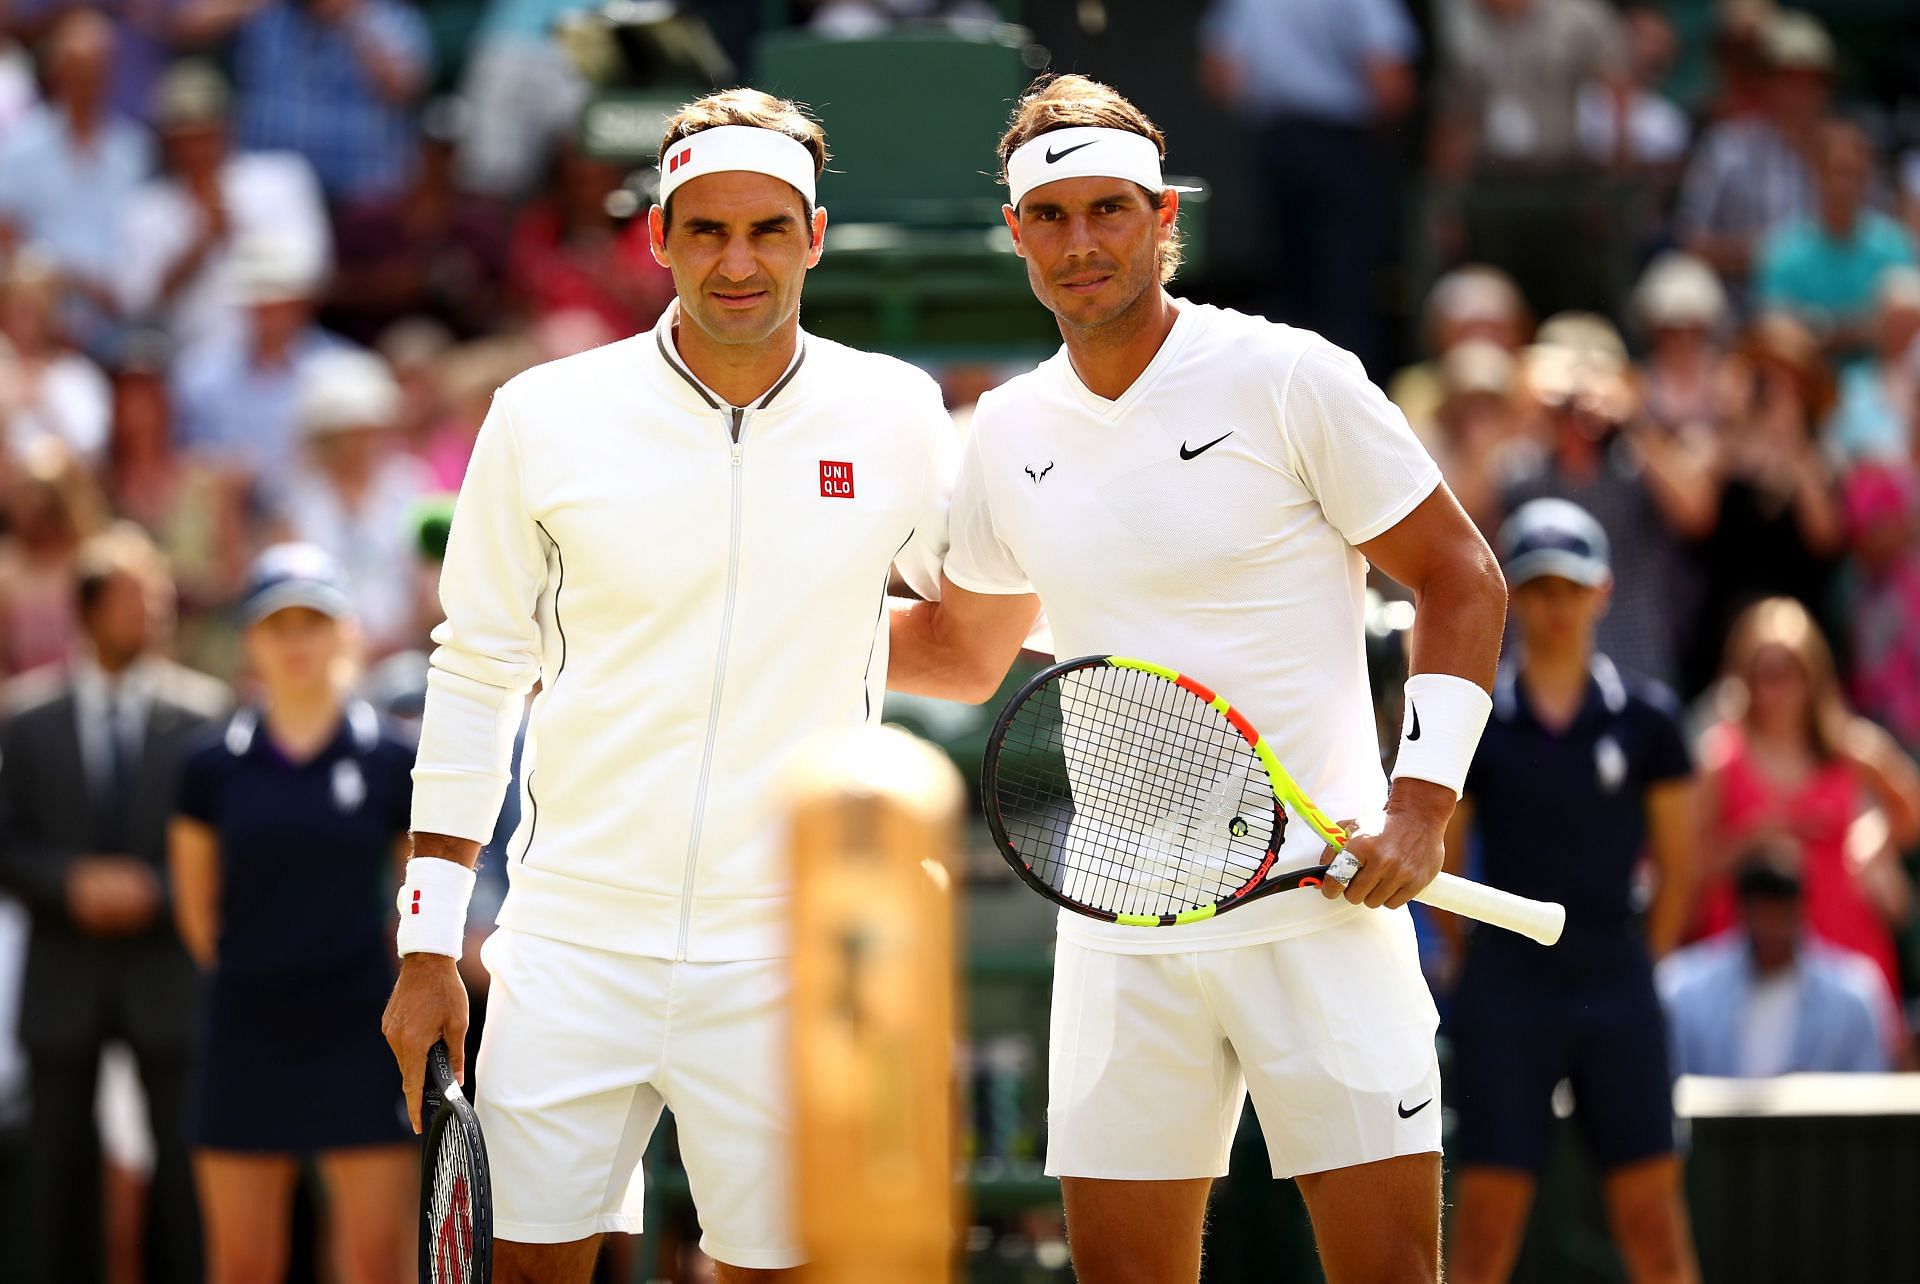 Rafael Nadal has a 15-5 lead over Roger Federer on the combined clay and grass head-to-head